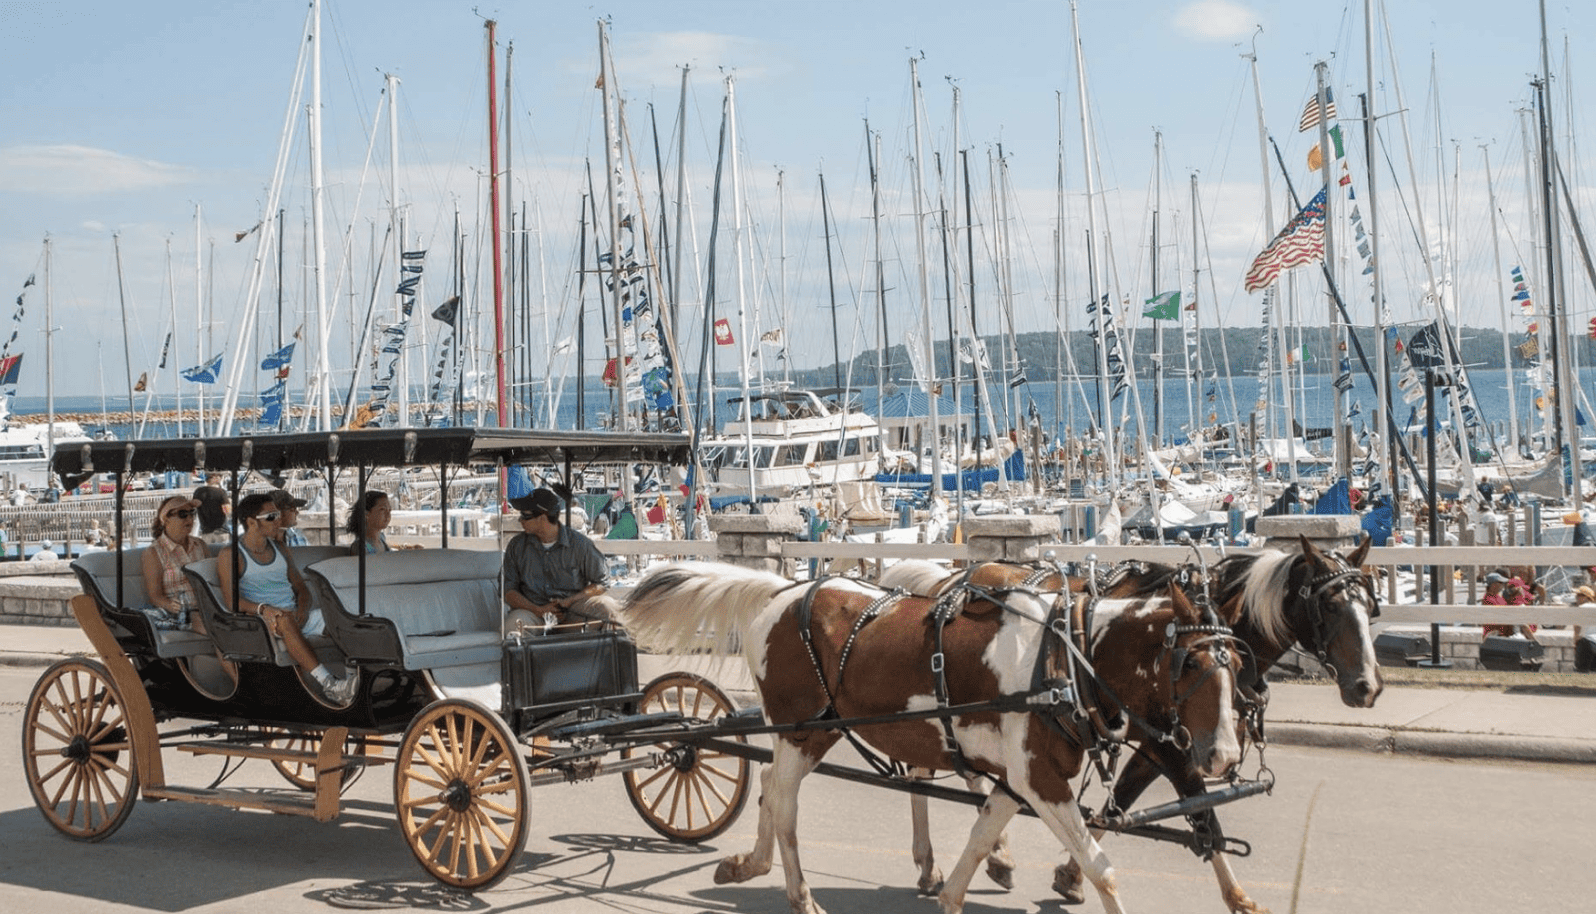 Horse drawn carriage with boats in the background